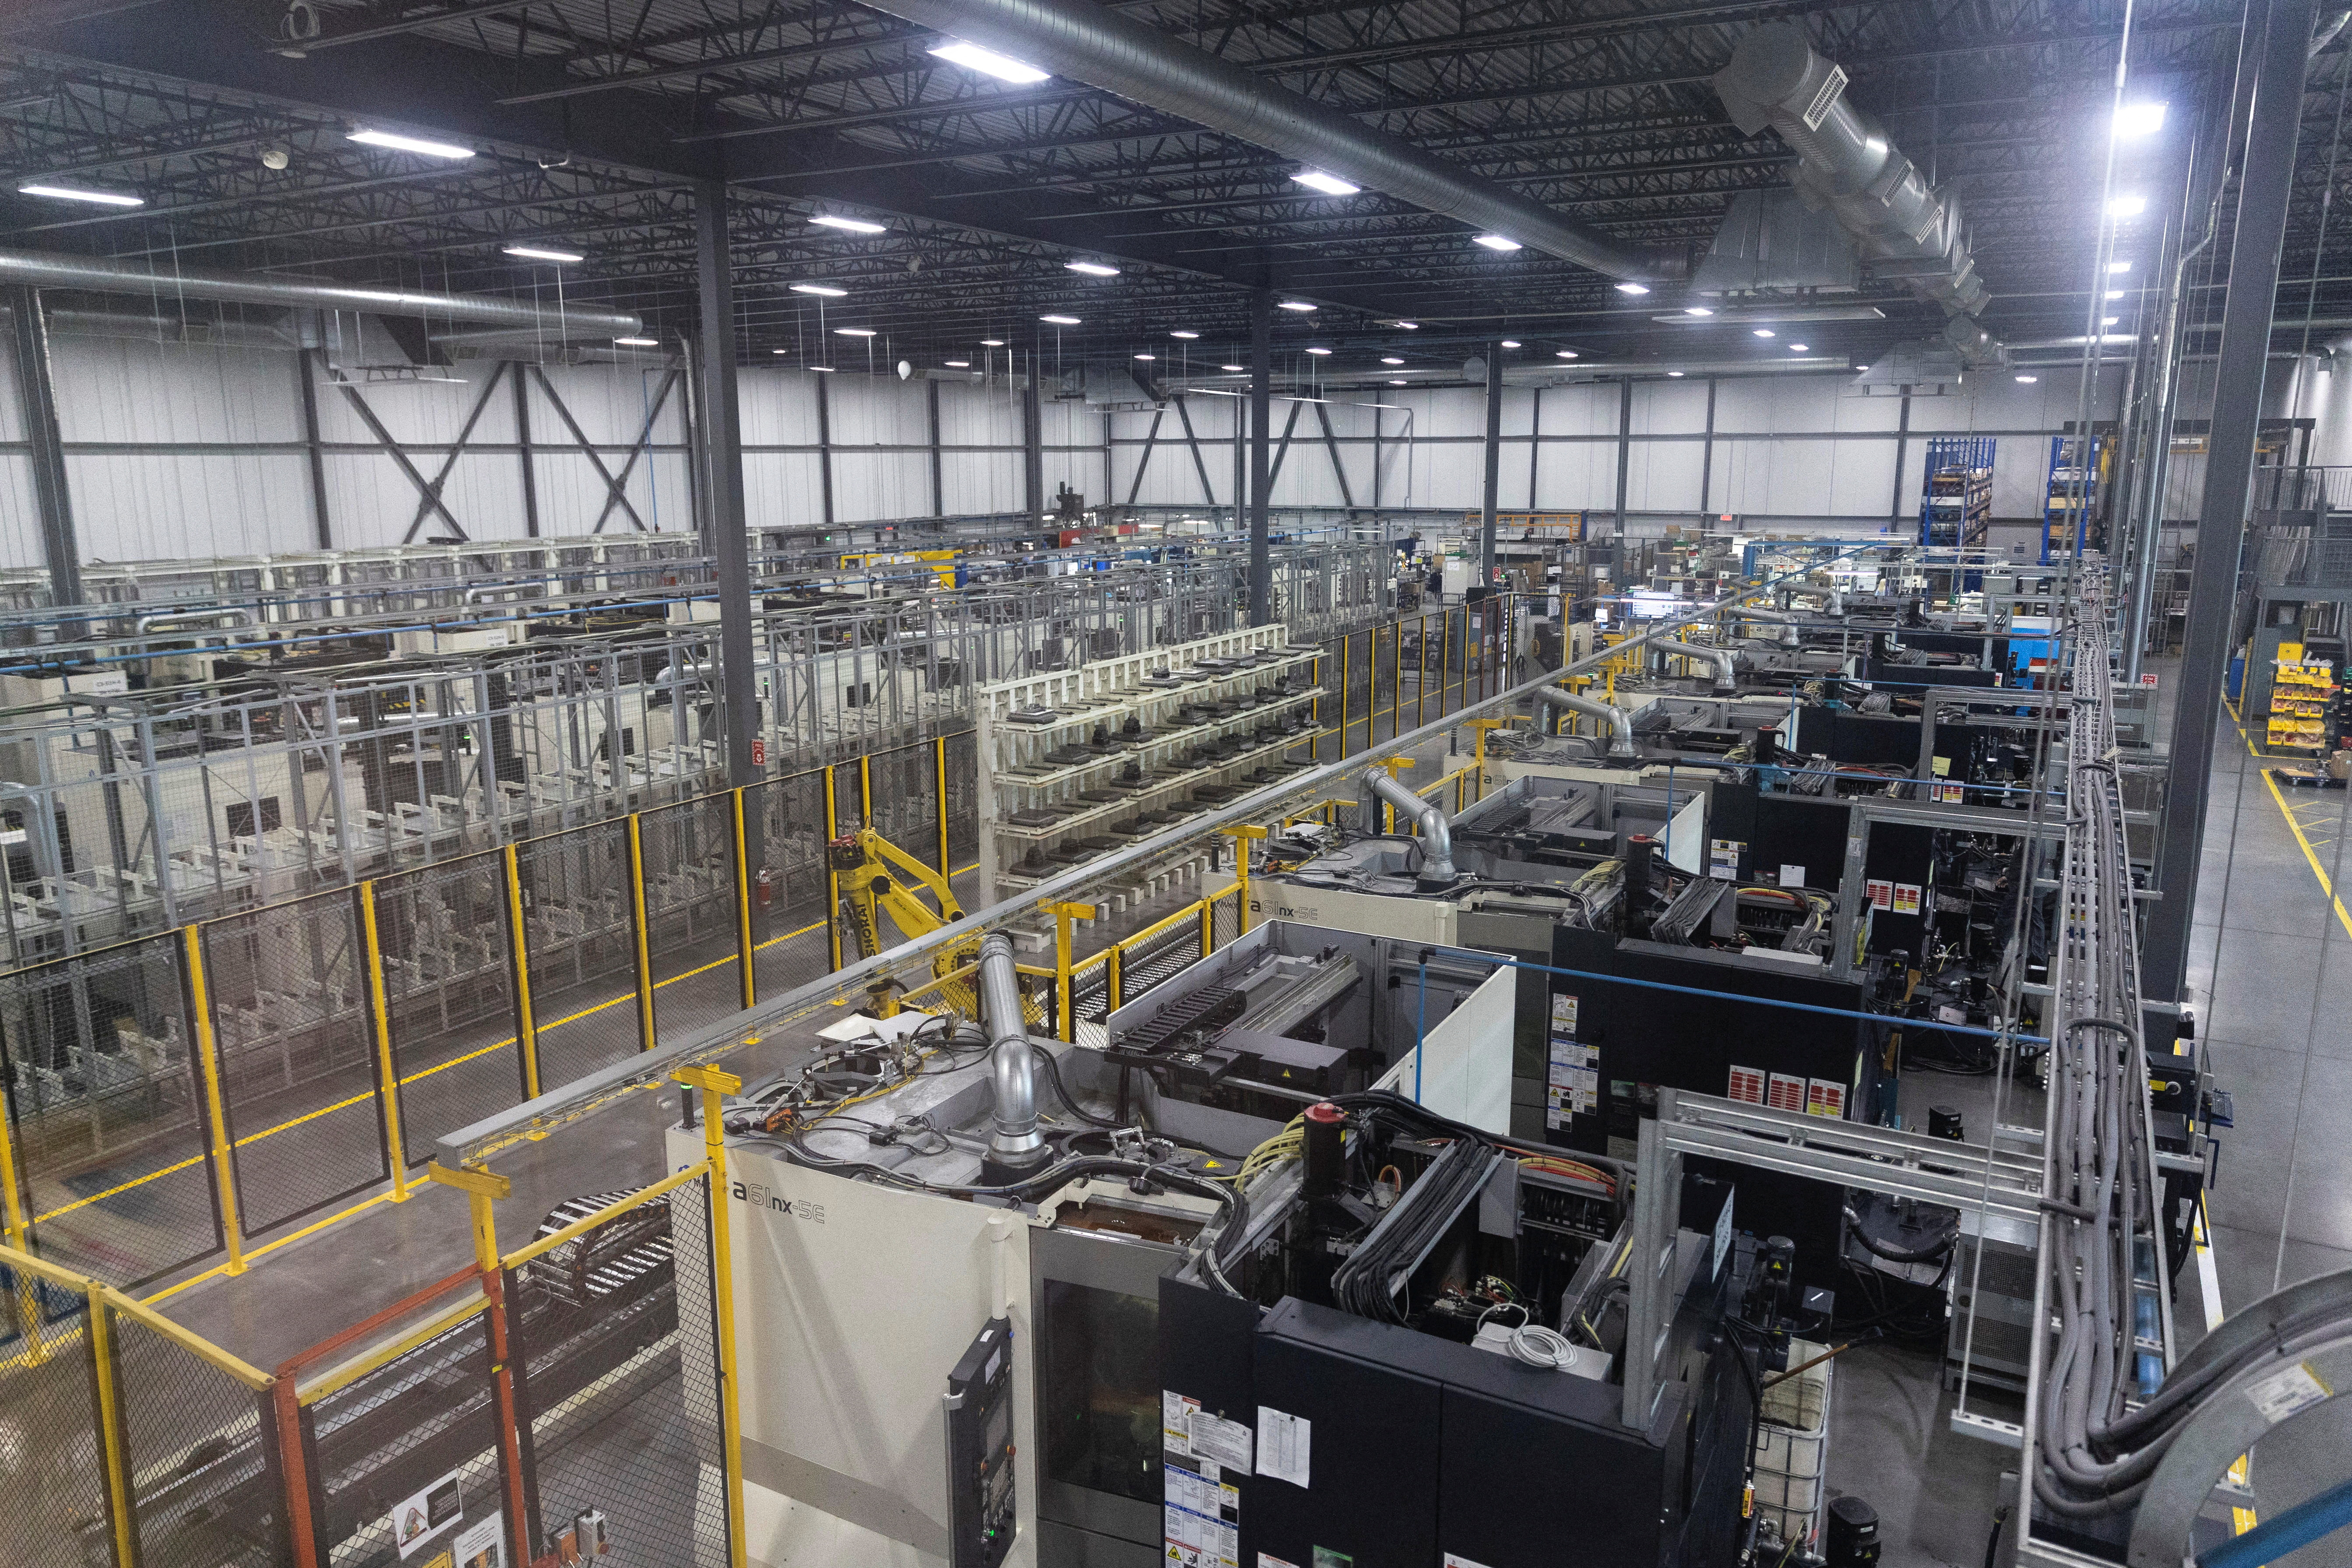 A general view of the factory floor and numerous automated machines used in the production and manufacturing of aircraft parts, at Abipa Canada in Boisbriand